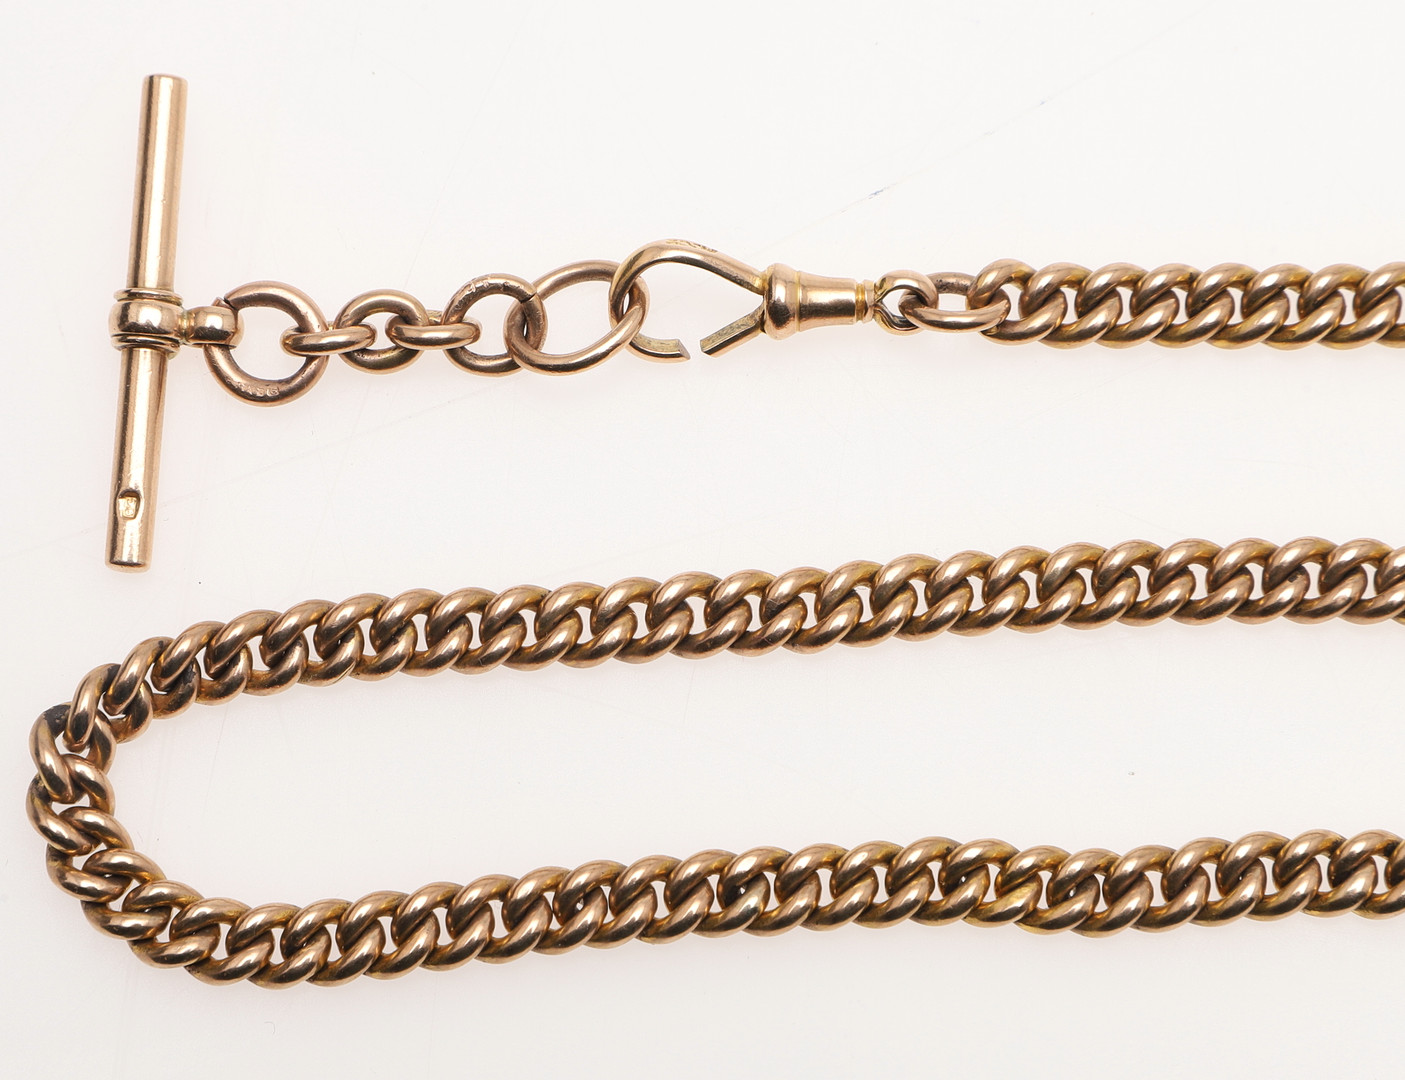 A 9CT GOLD CURB LINK WATCHCHAIN. - Image 3 of 3